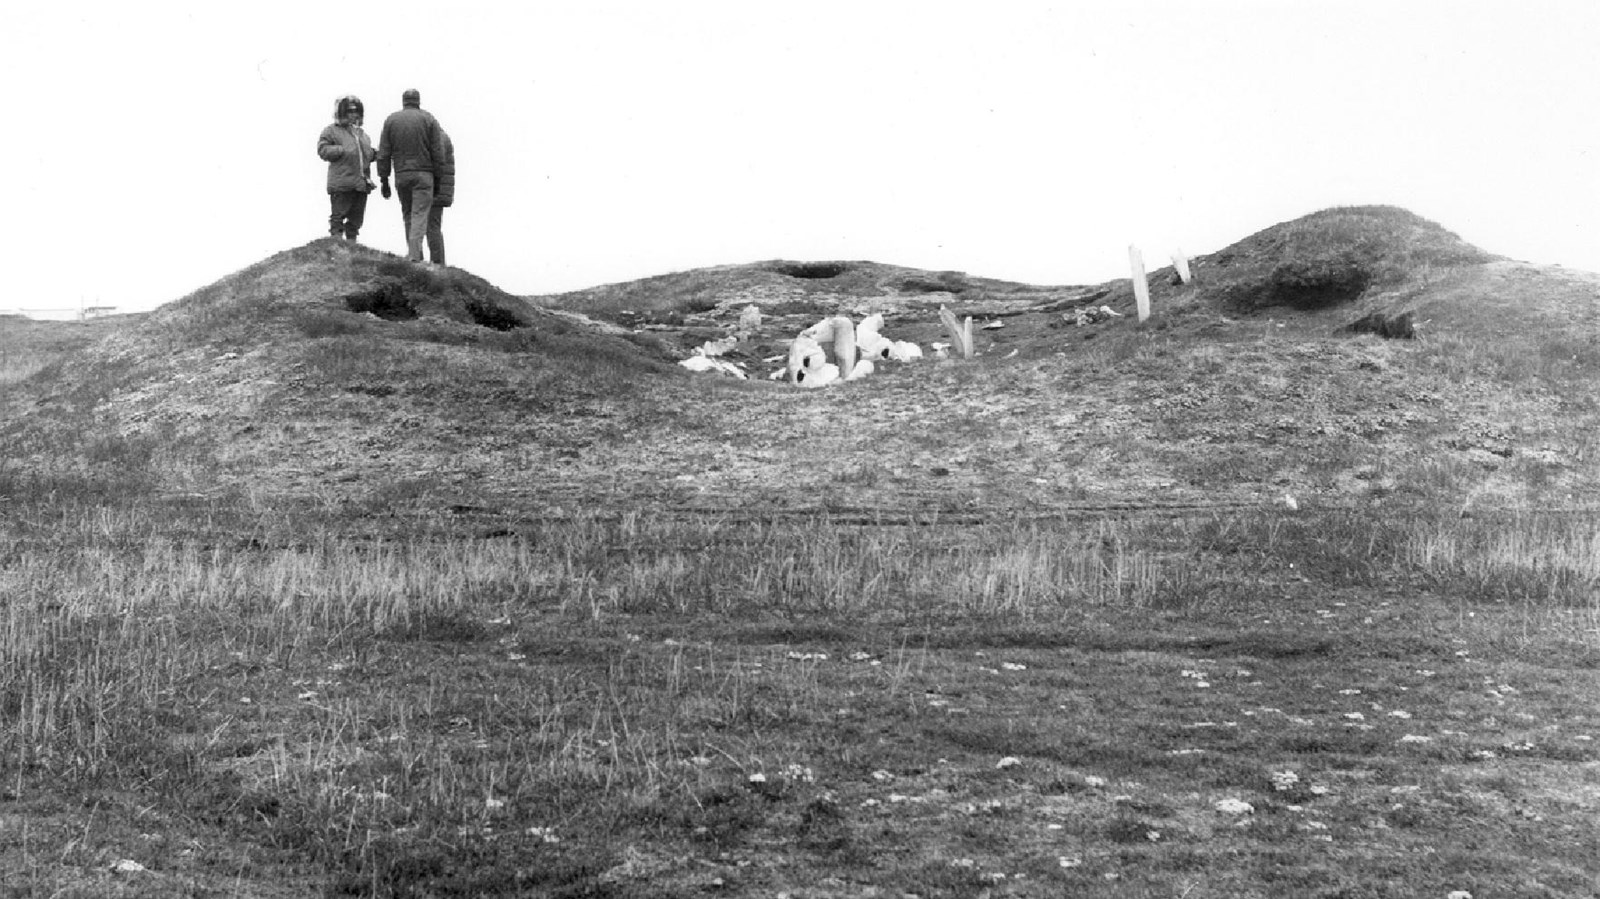 A mound site whale bones at its peak and three people standing next to them